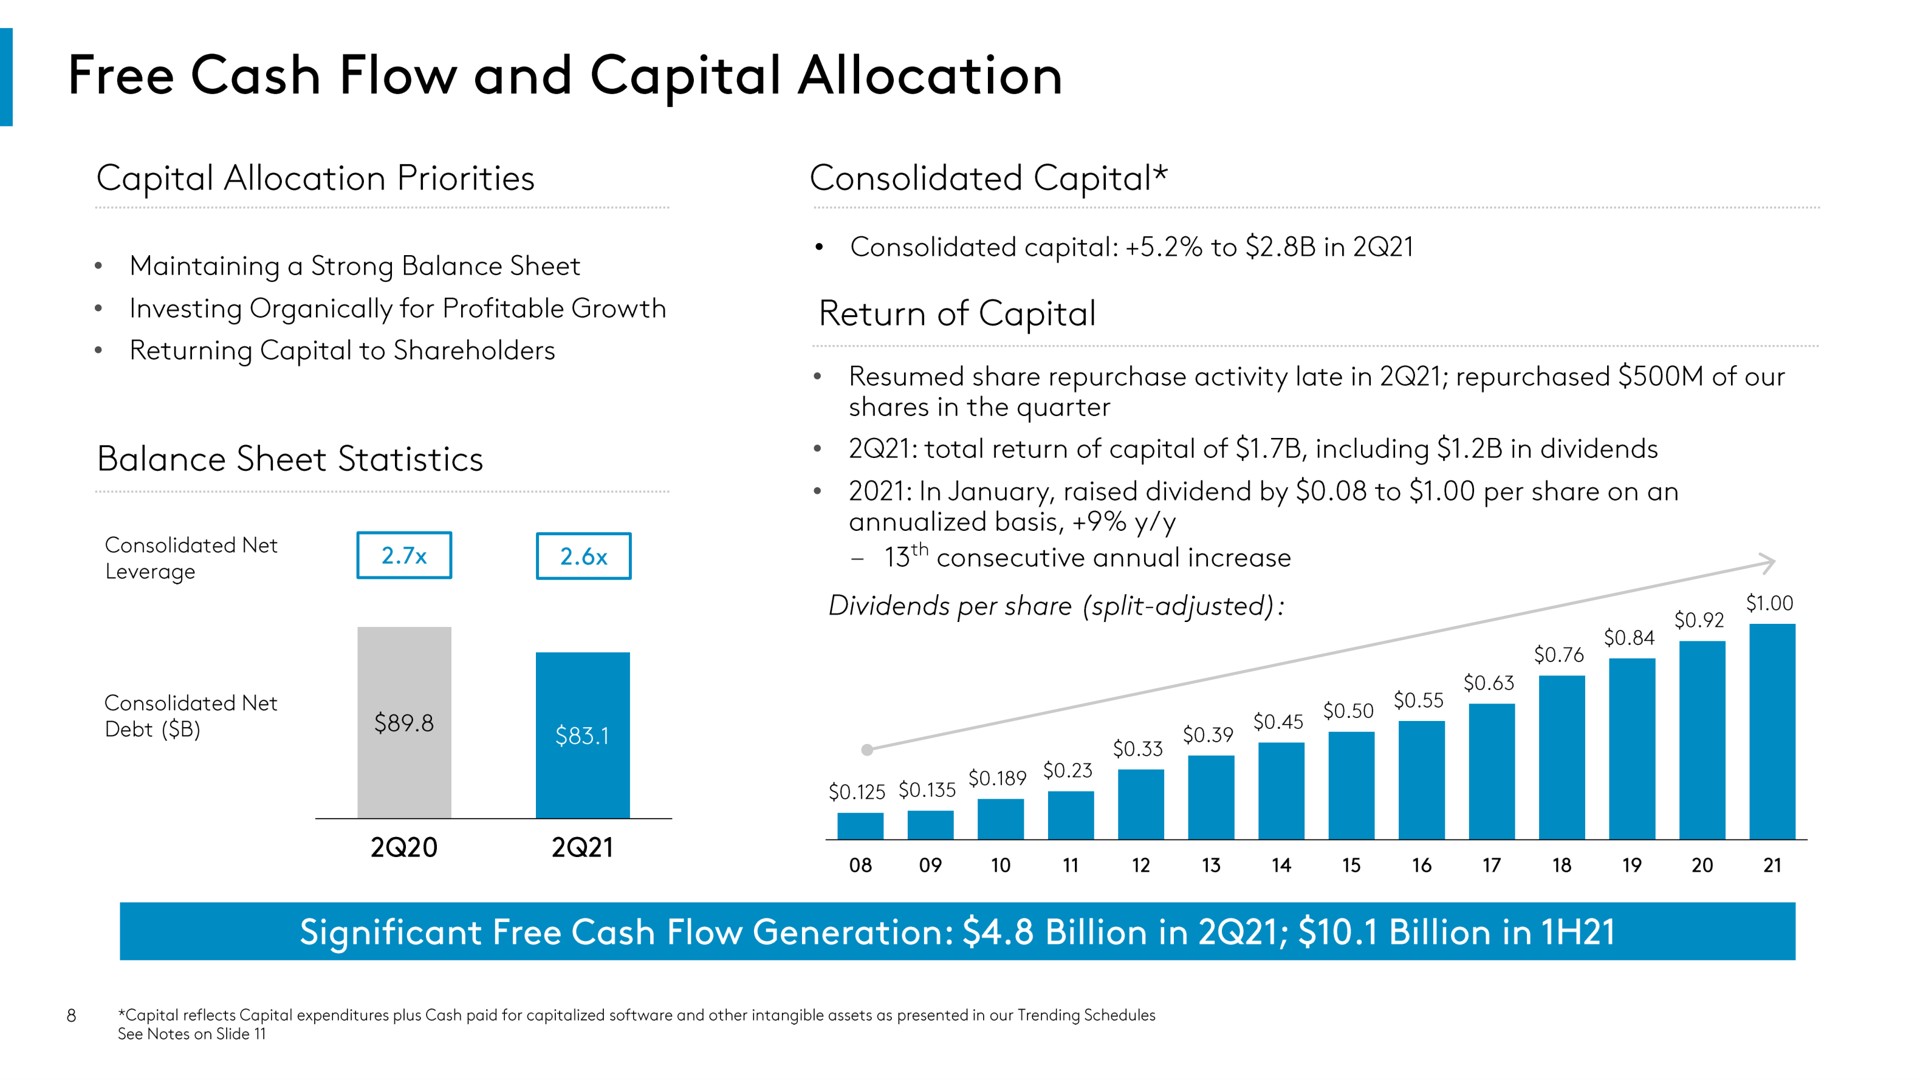 free cash flow and capital allocation significant free cash flow generation billion in billion in | Comcast